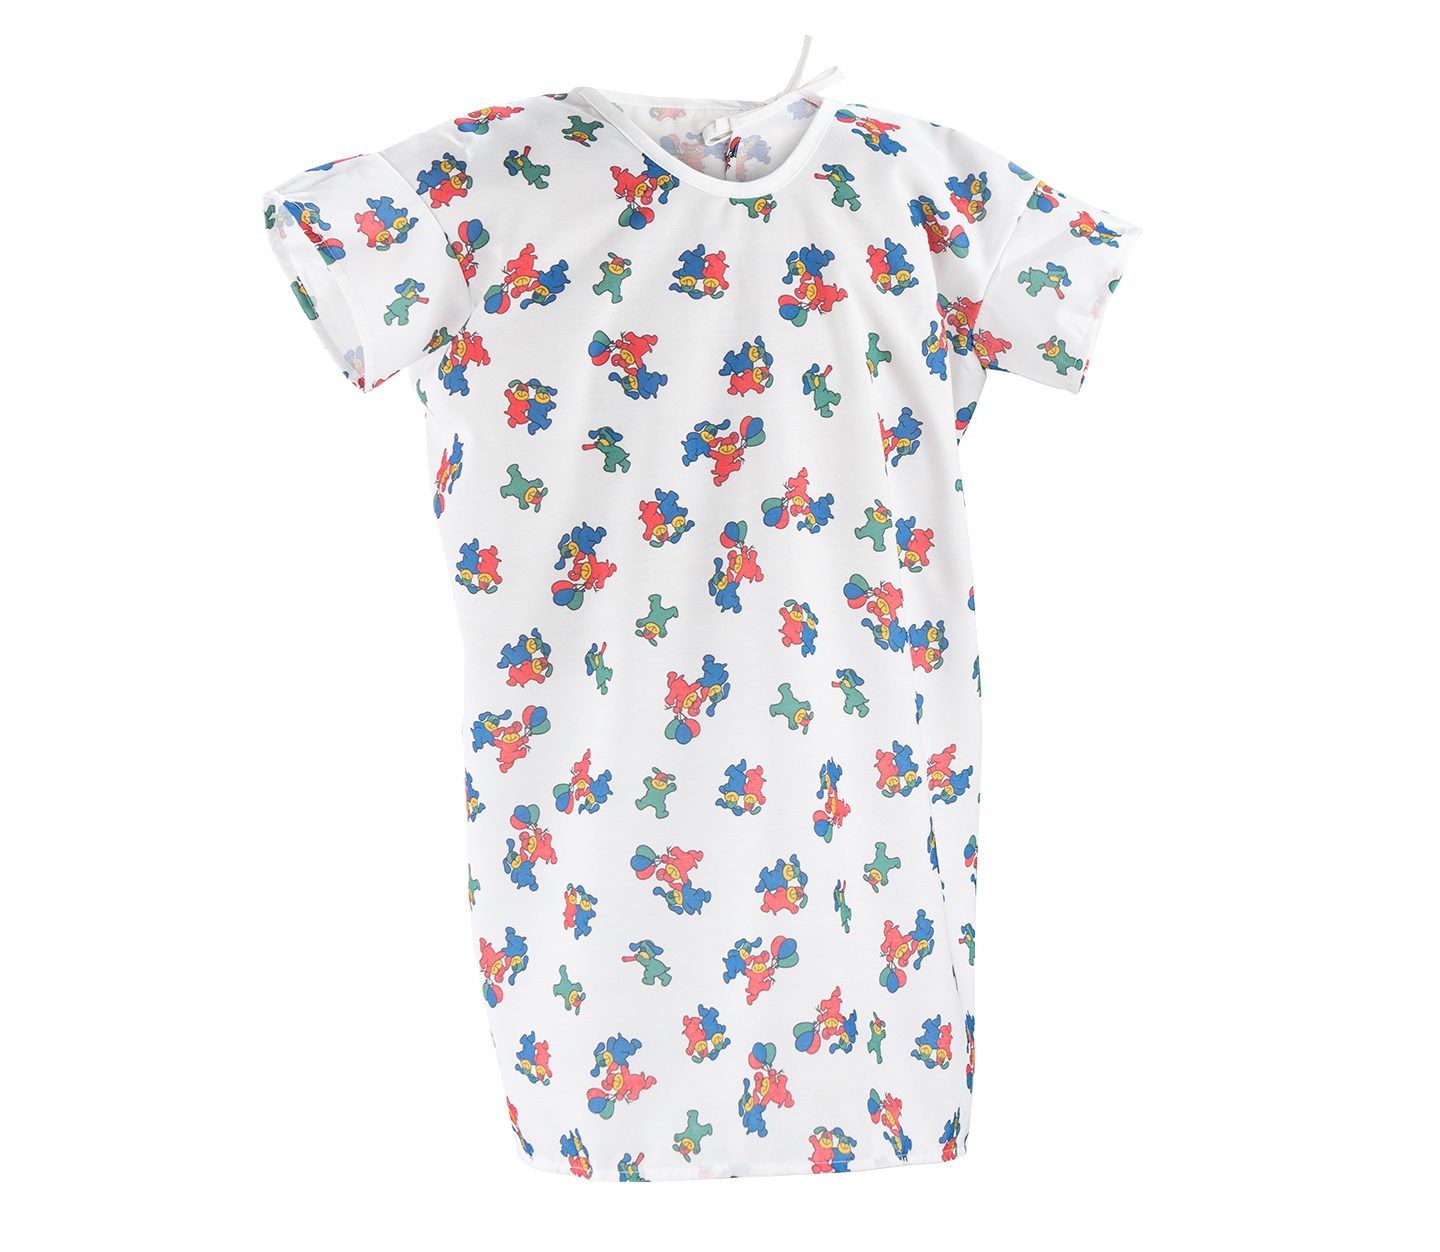 Pediatric Hospital Gowns | Kid’s Patient Gowns